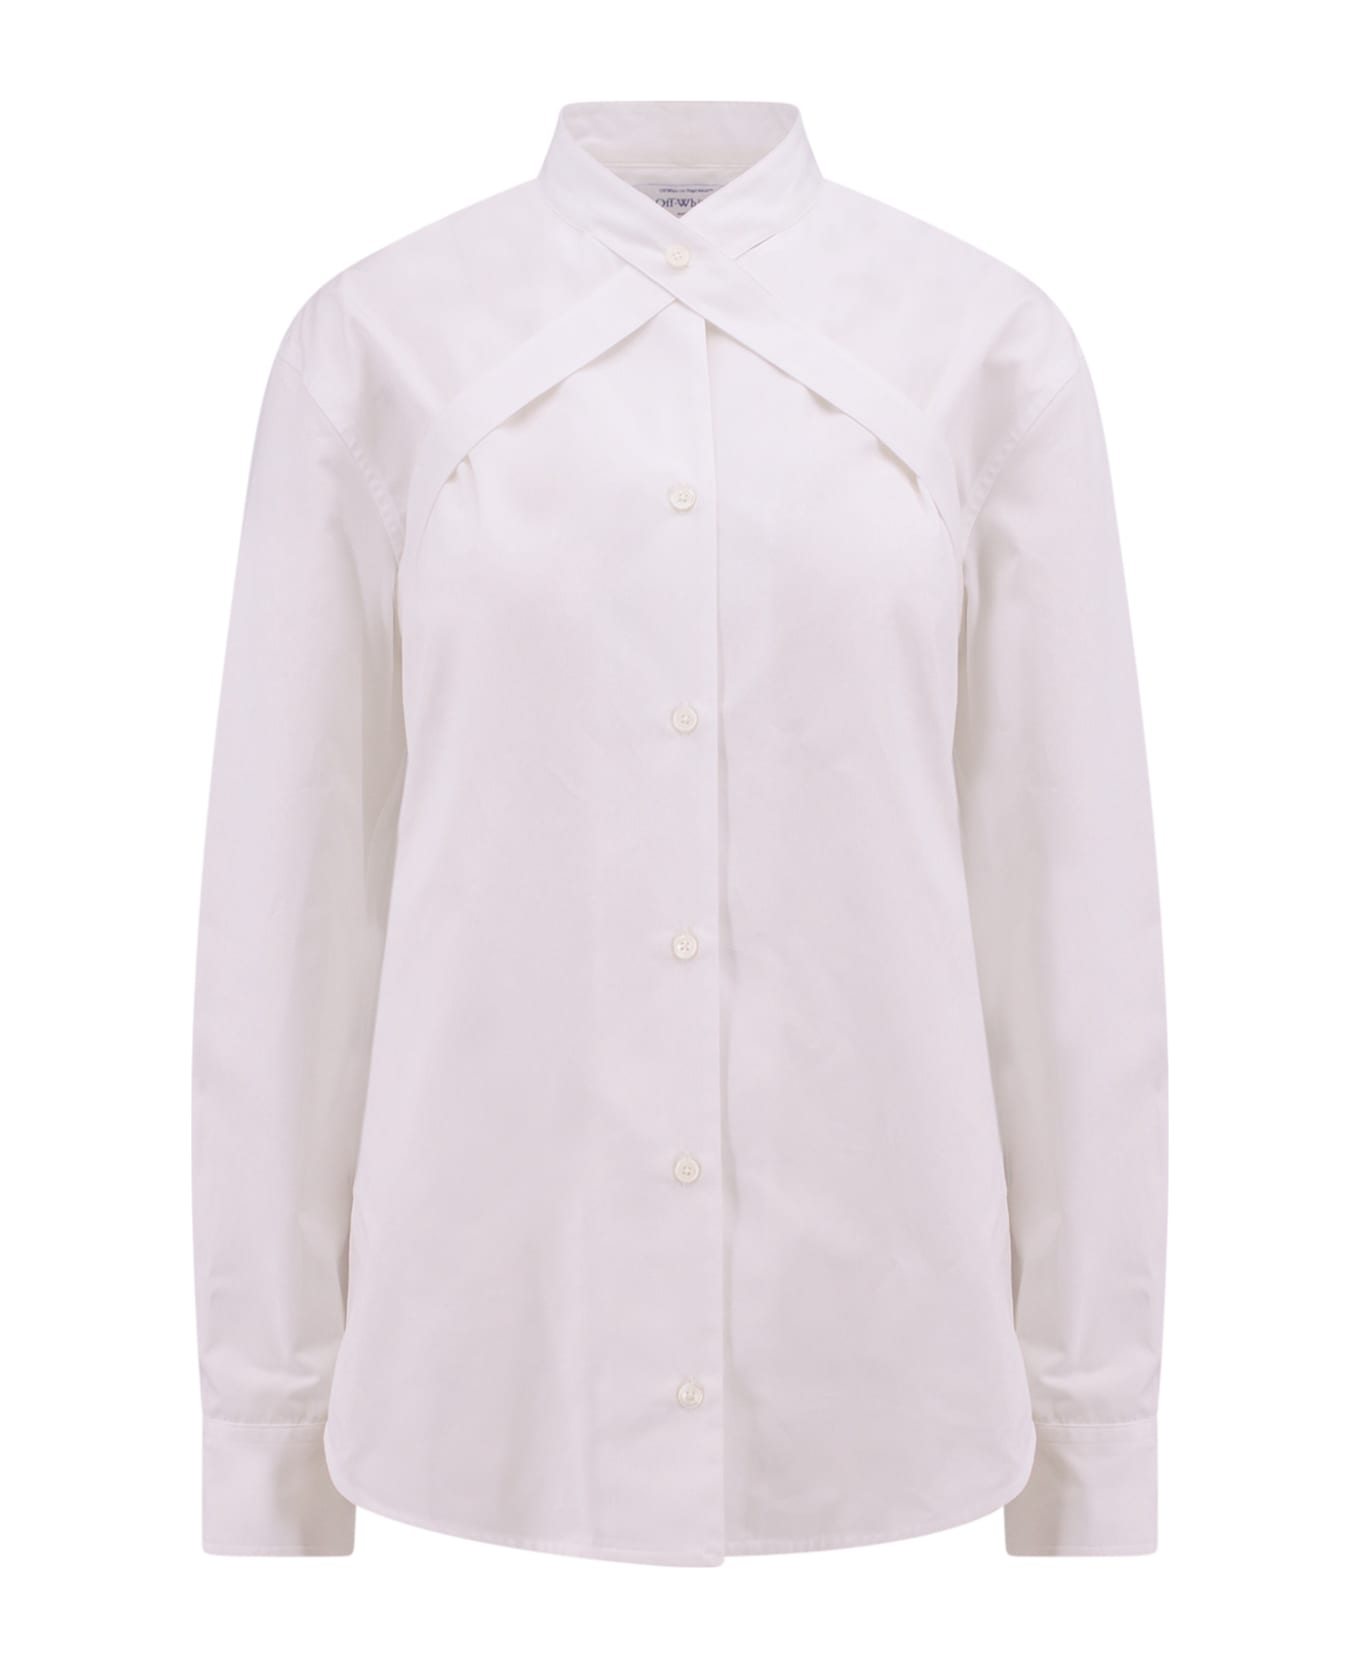 Off-White Crossed Bands Shirt - White シャツ